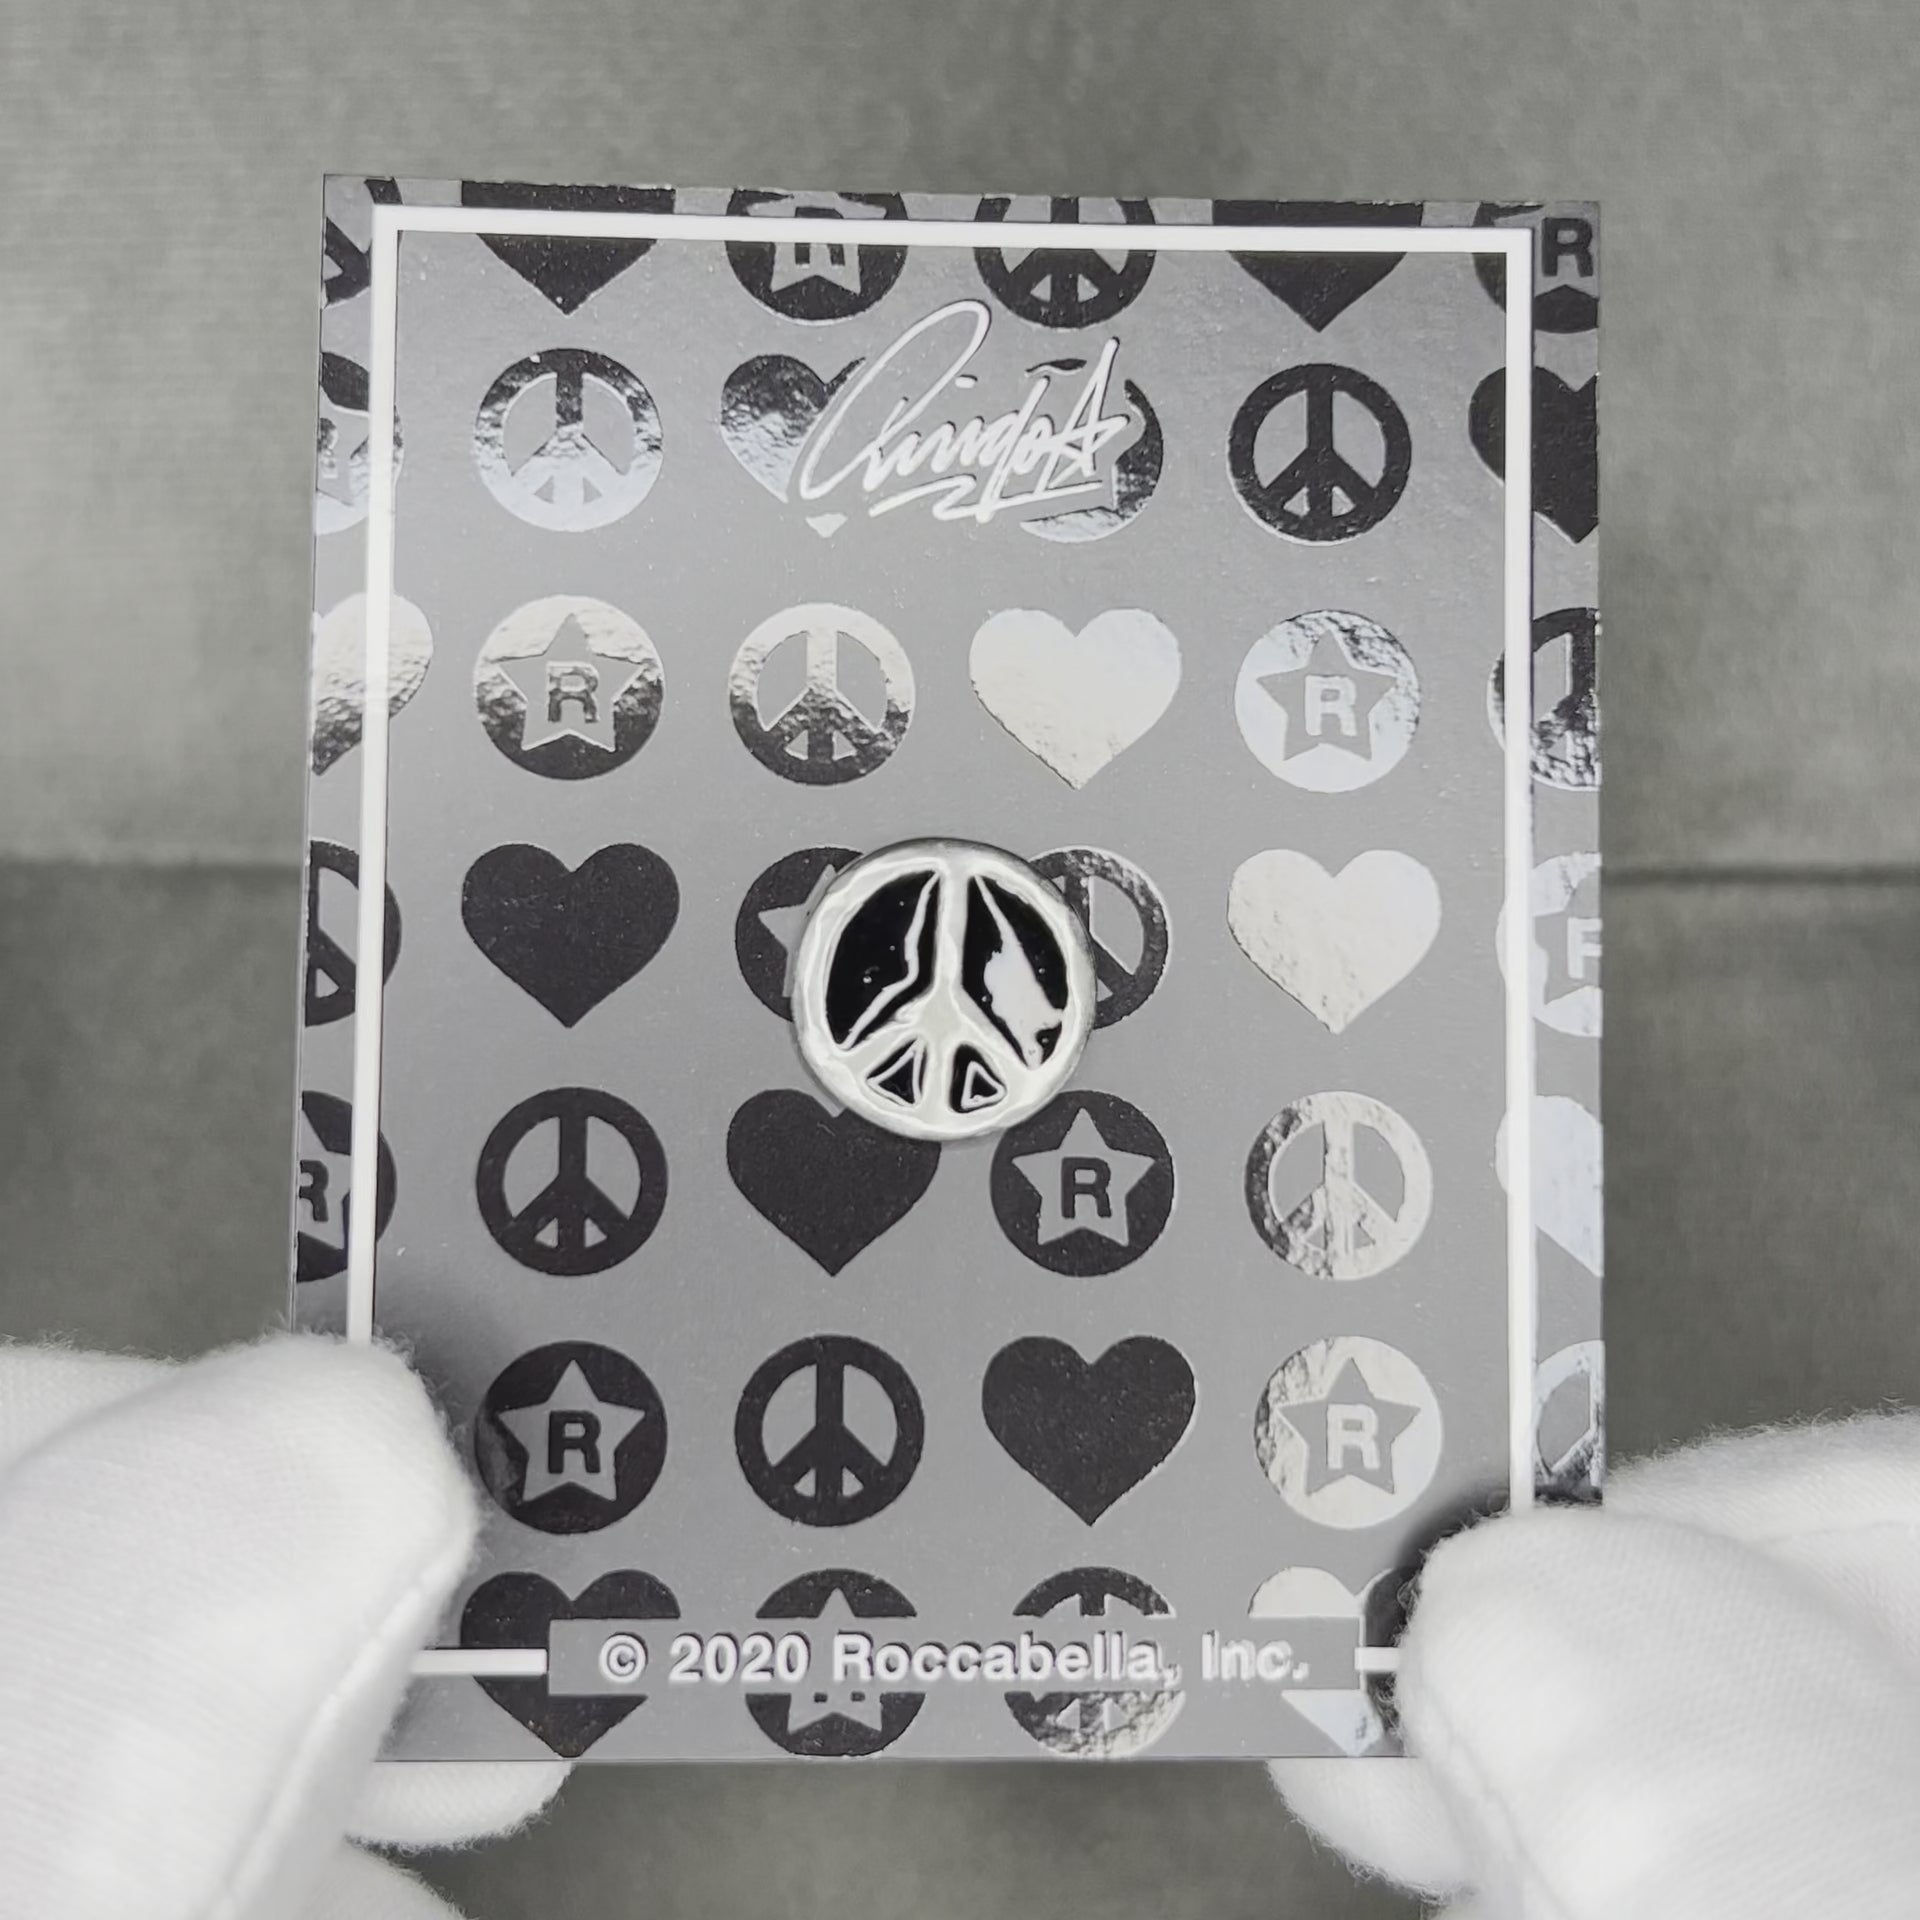 The Ringo Starr peace pin. Pewter with enamel fill, made in Los Angeles, CA